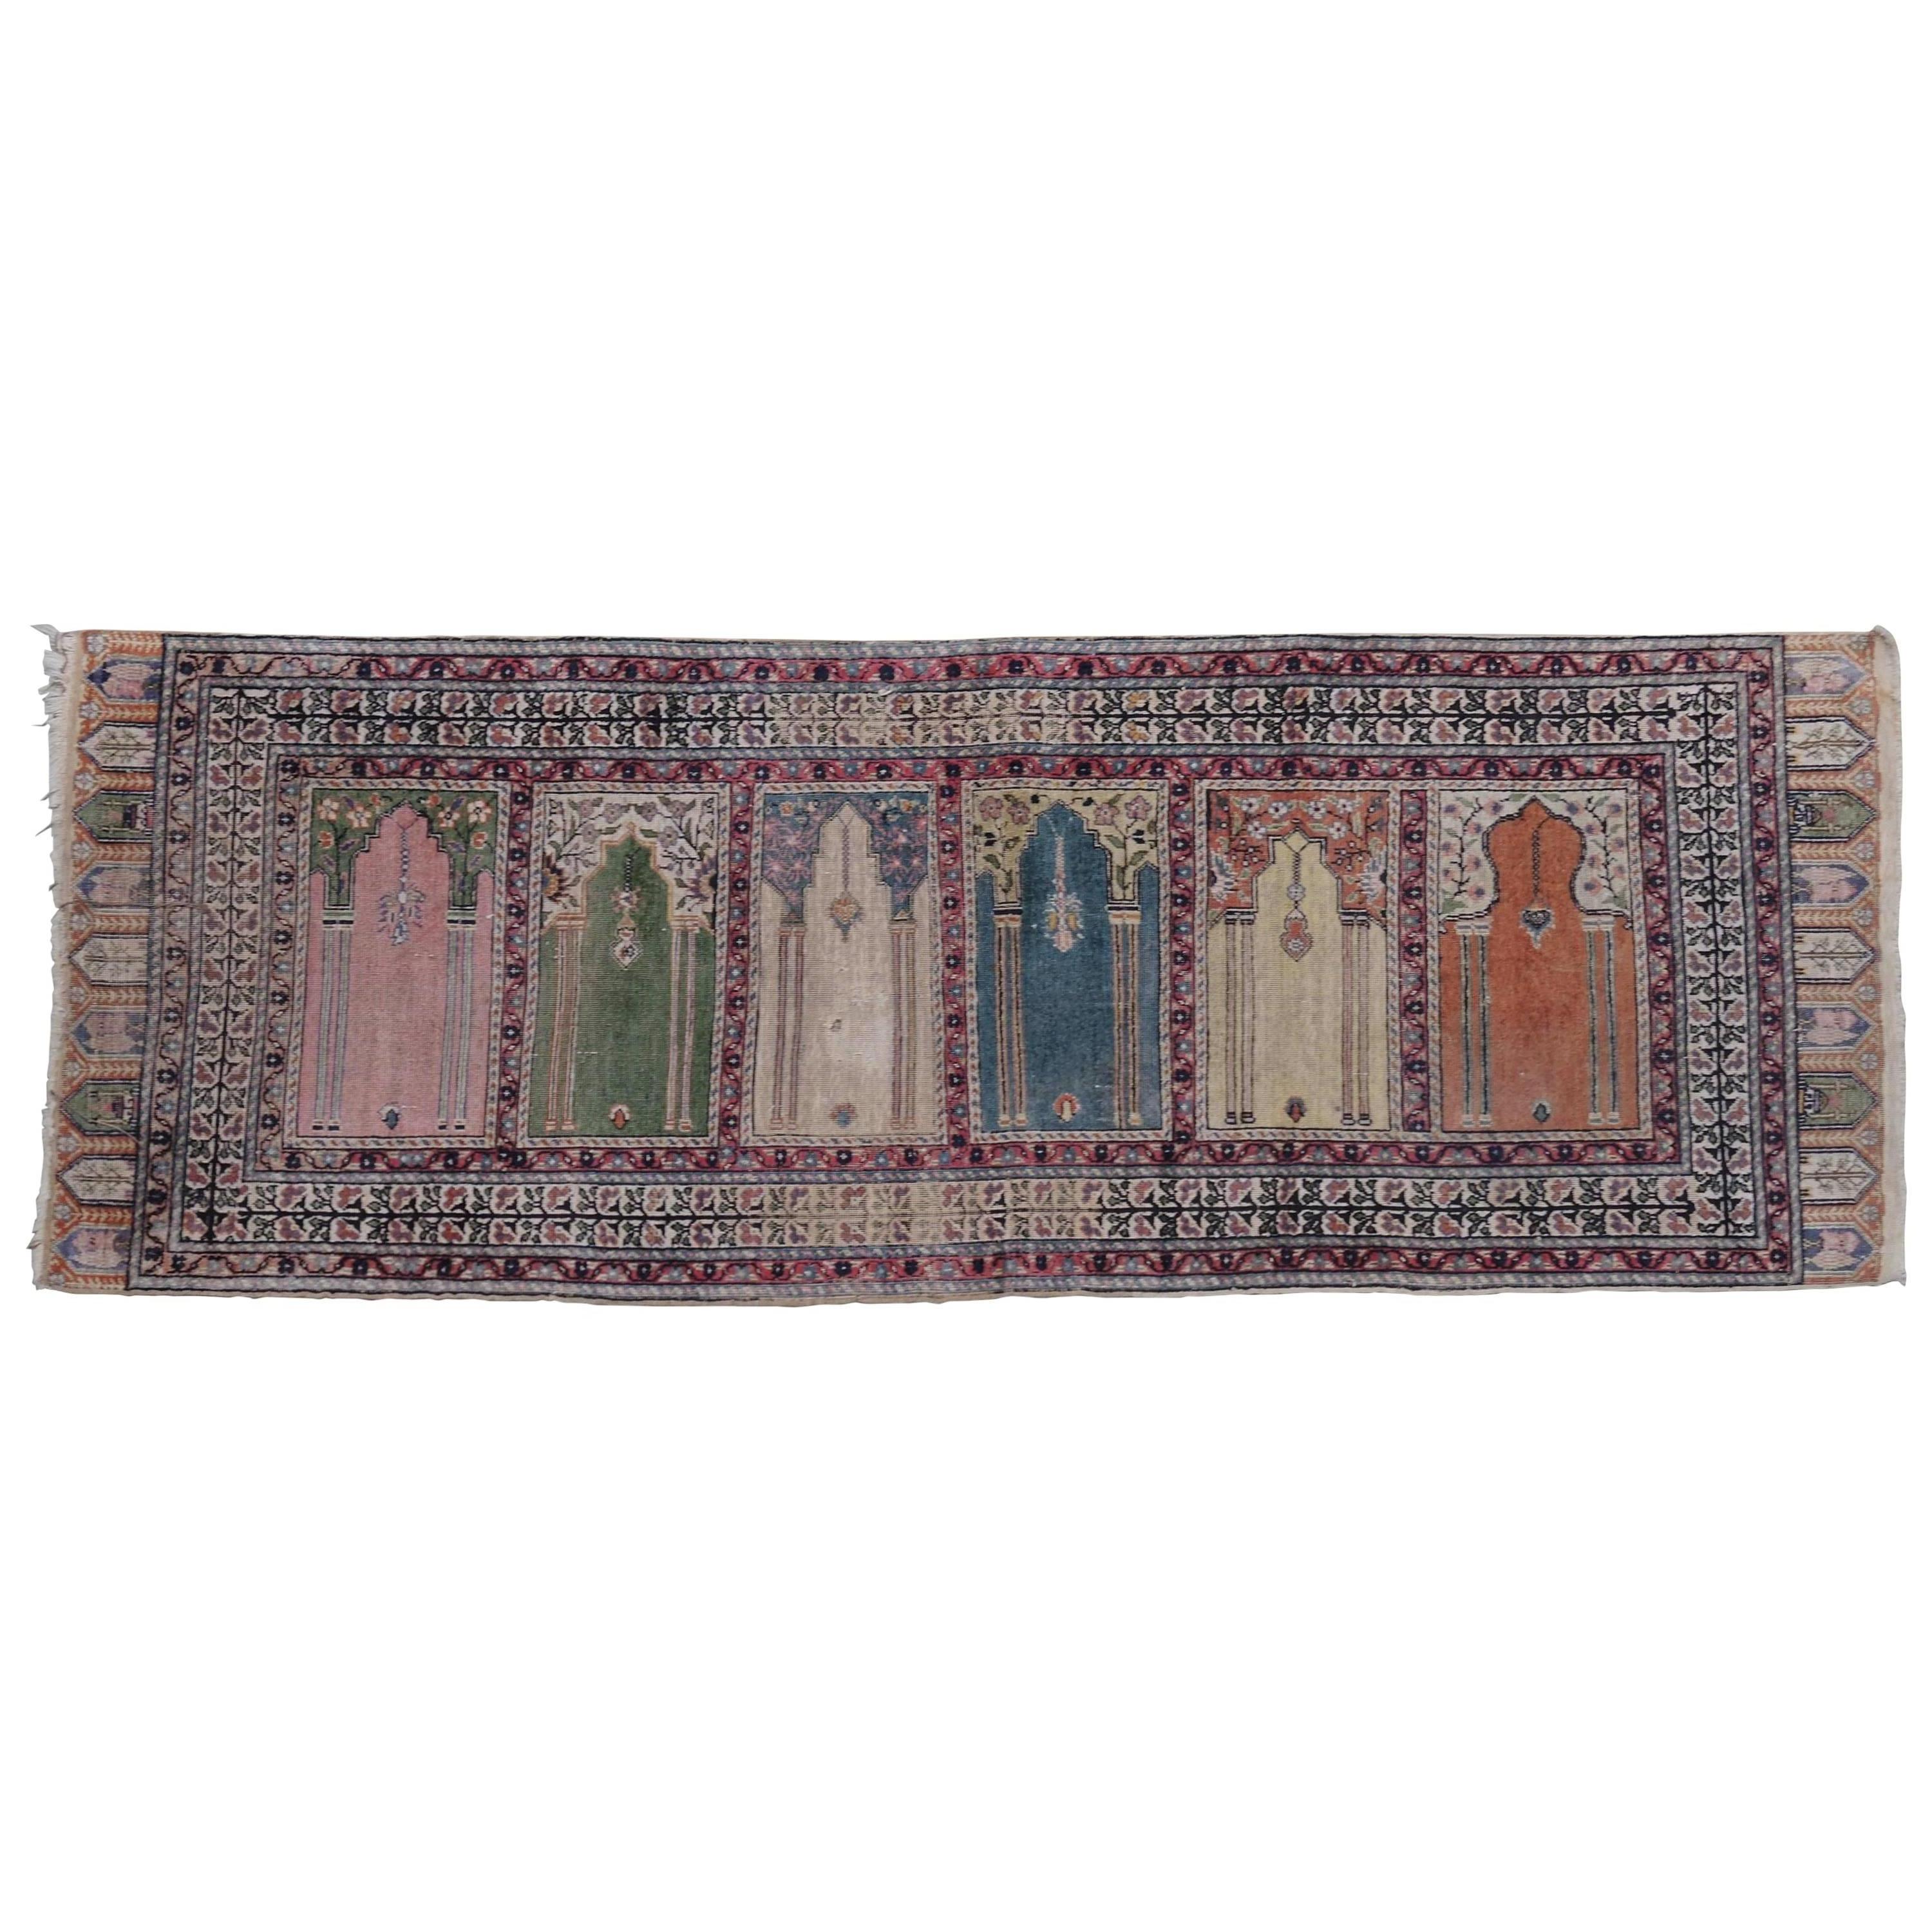 Antique Turkish Anatolian Kayseri Silk Rug with Architectural Arches and Pillars